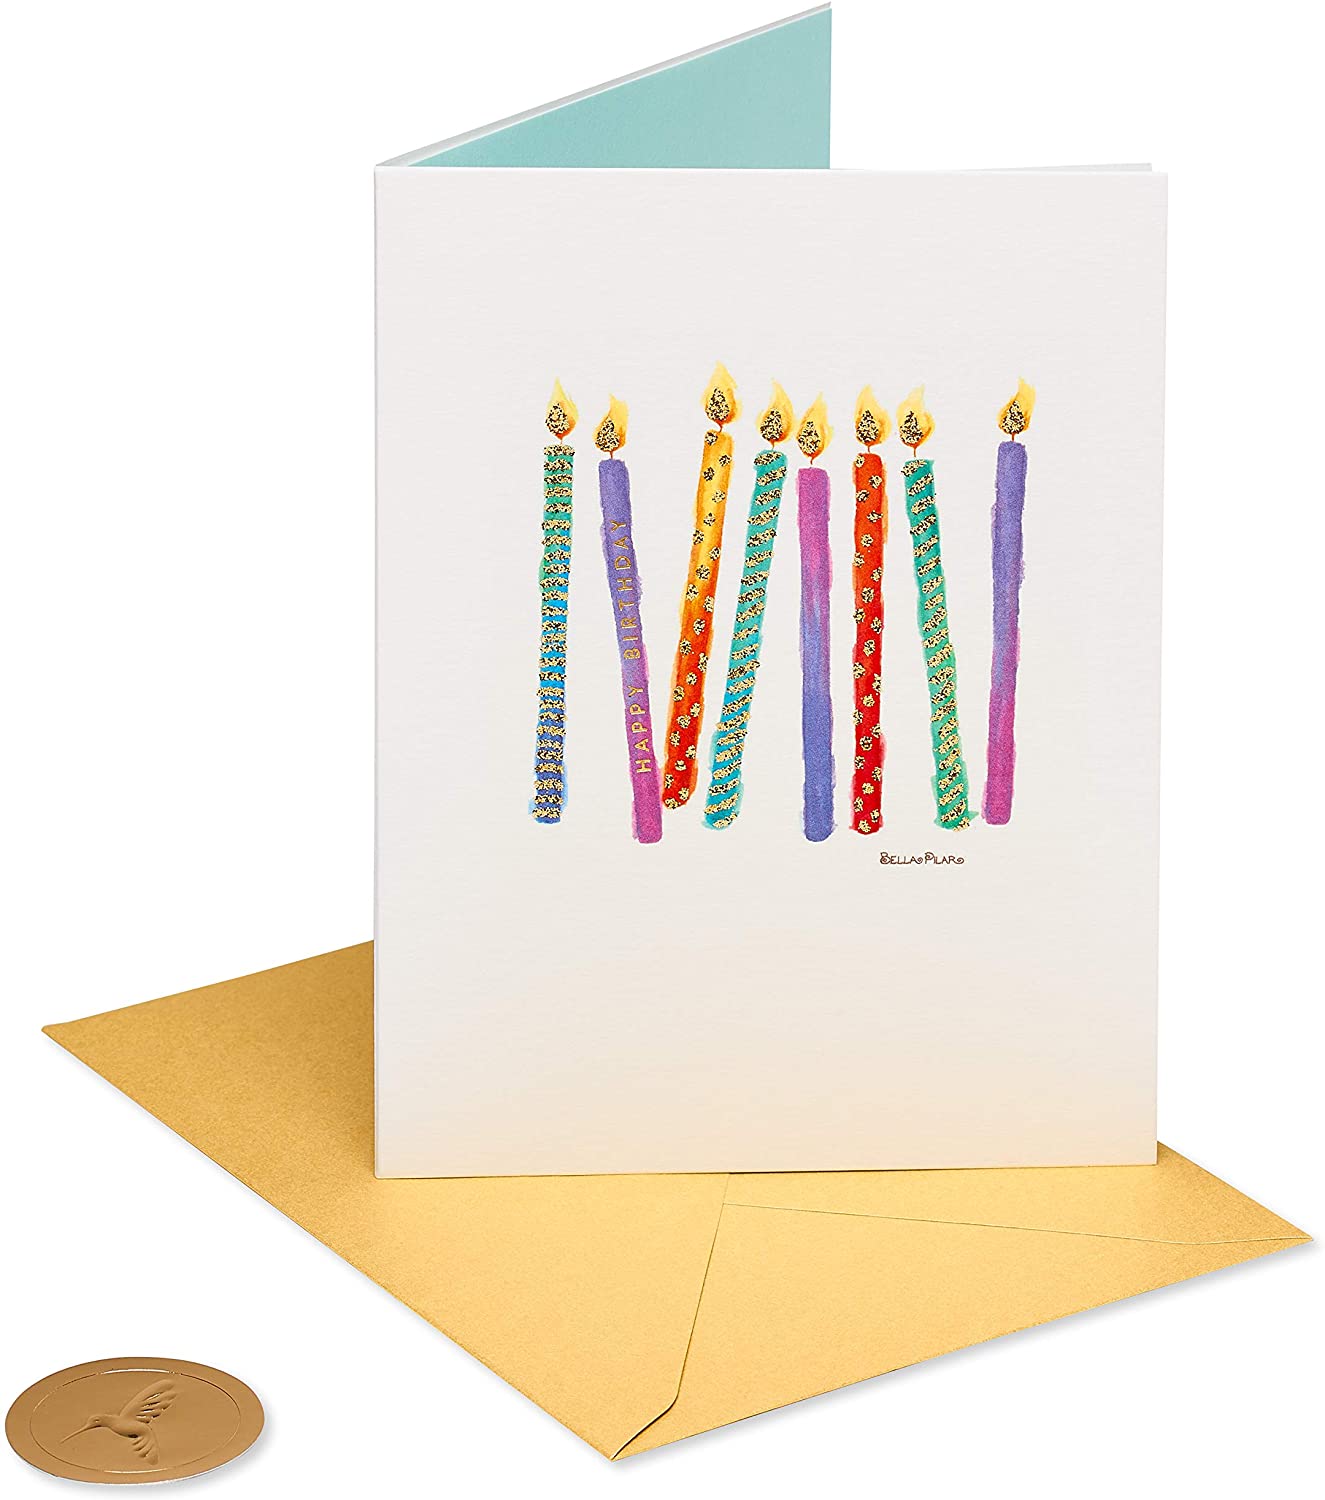 What Is The Most You’re Willing To Pay For a Greeting Card?